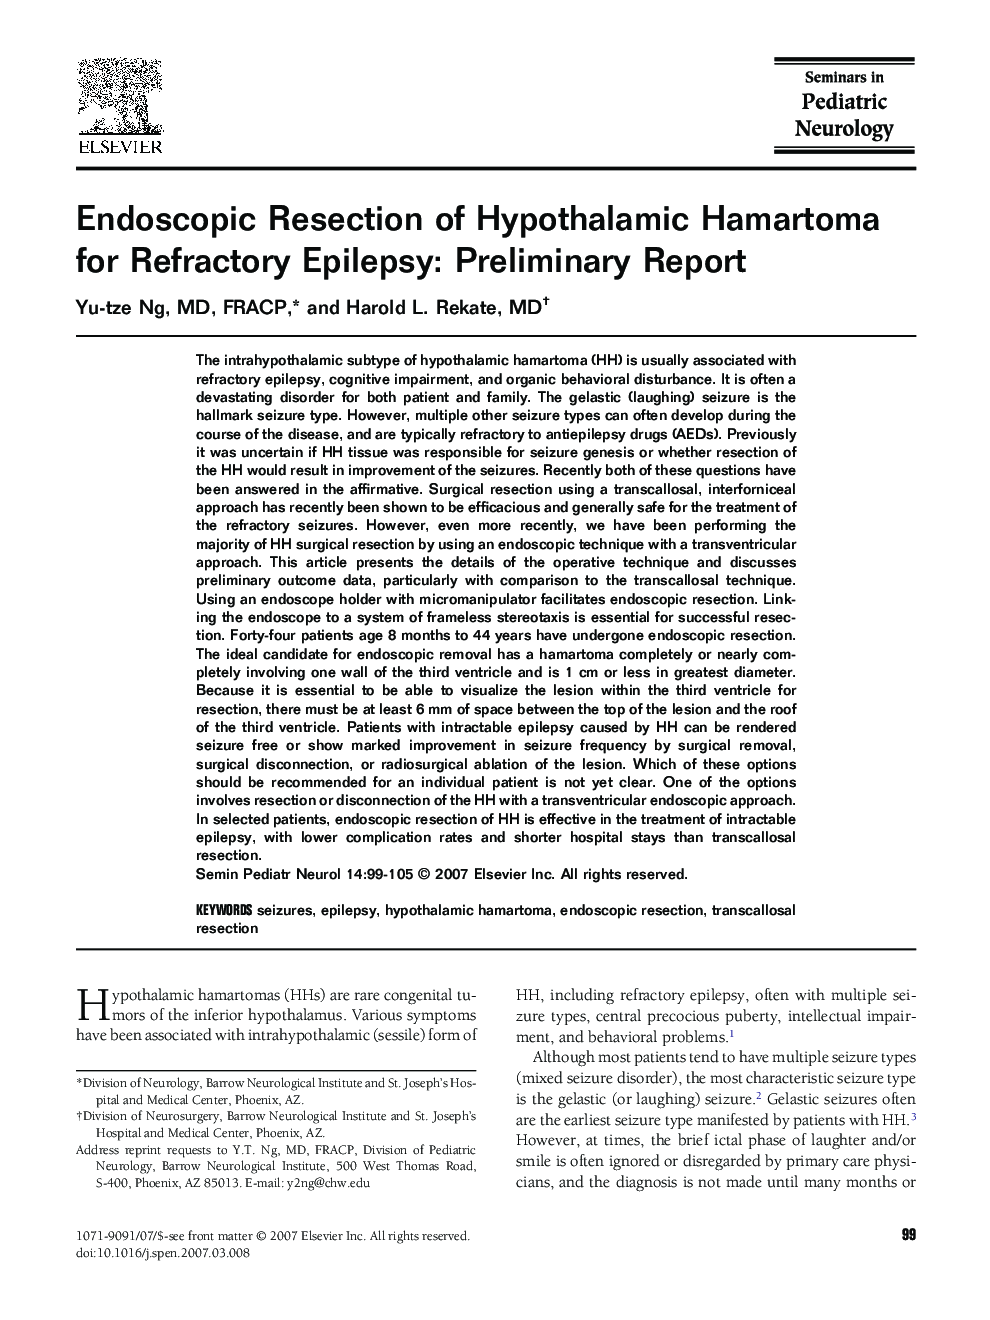 Endoscopic Resection of Hypothalamic Hamartoma for Refractory Epilepsy: Preliminary Report